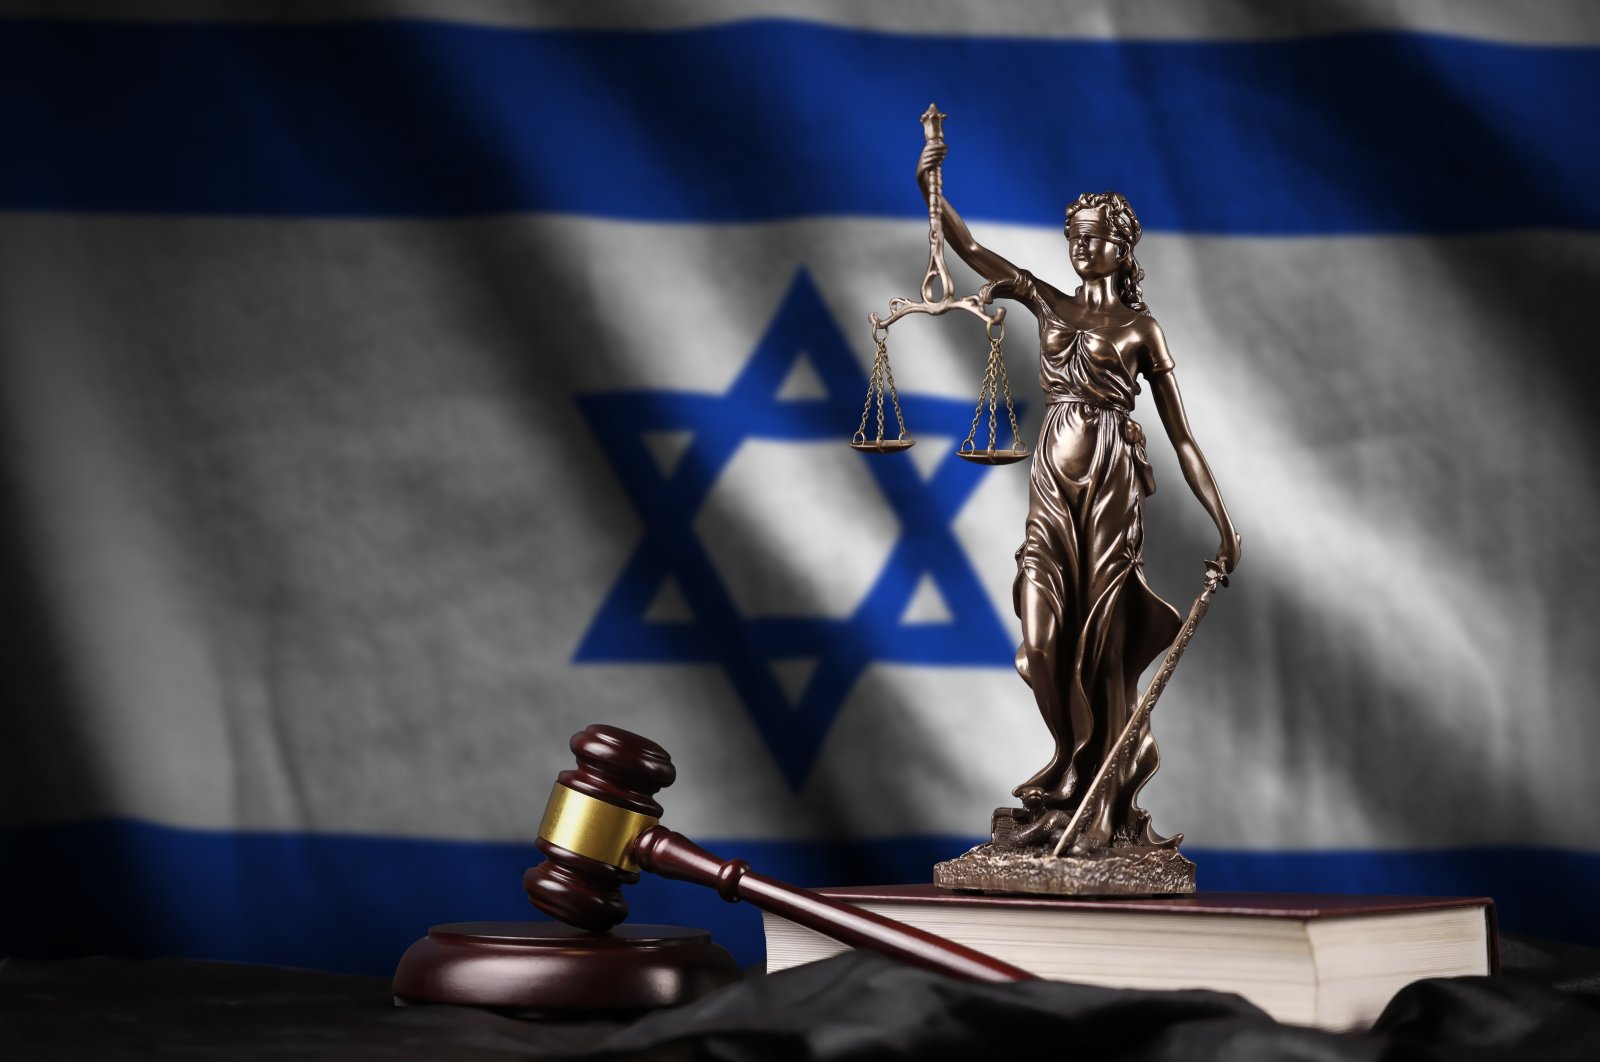 Hundreds of Israeli high-tech workers protested against the proposed judicial overhaul, claiming the government&#039;s controversial plans will hurt the flourishing sector by undermining the rule of law and that the industry would suffer if foreign firms lost confidence in Israel&#039;s legal system and democratic principles. (Shutterstock Photo)